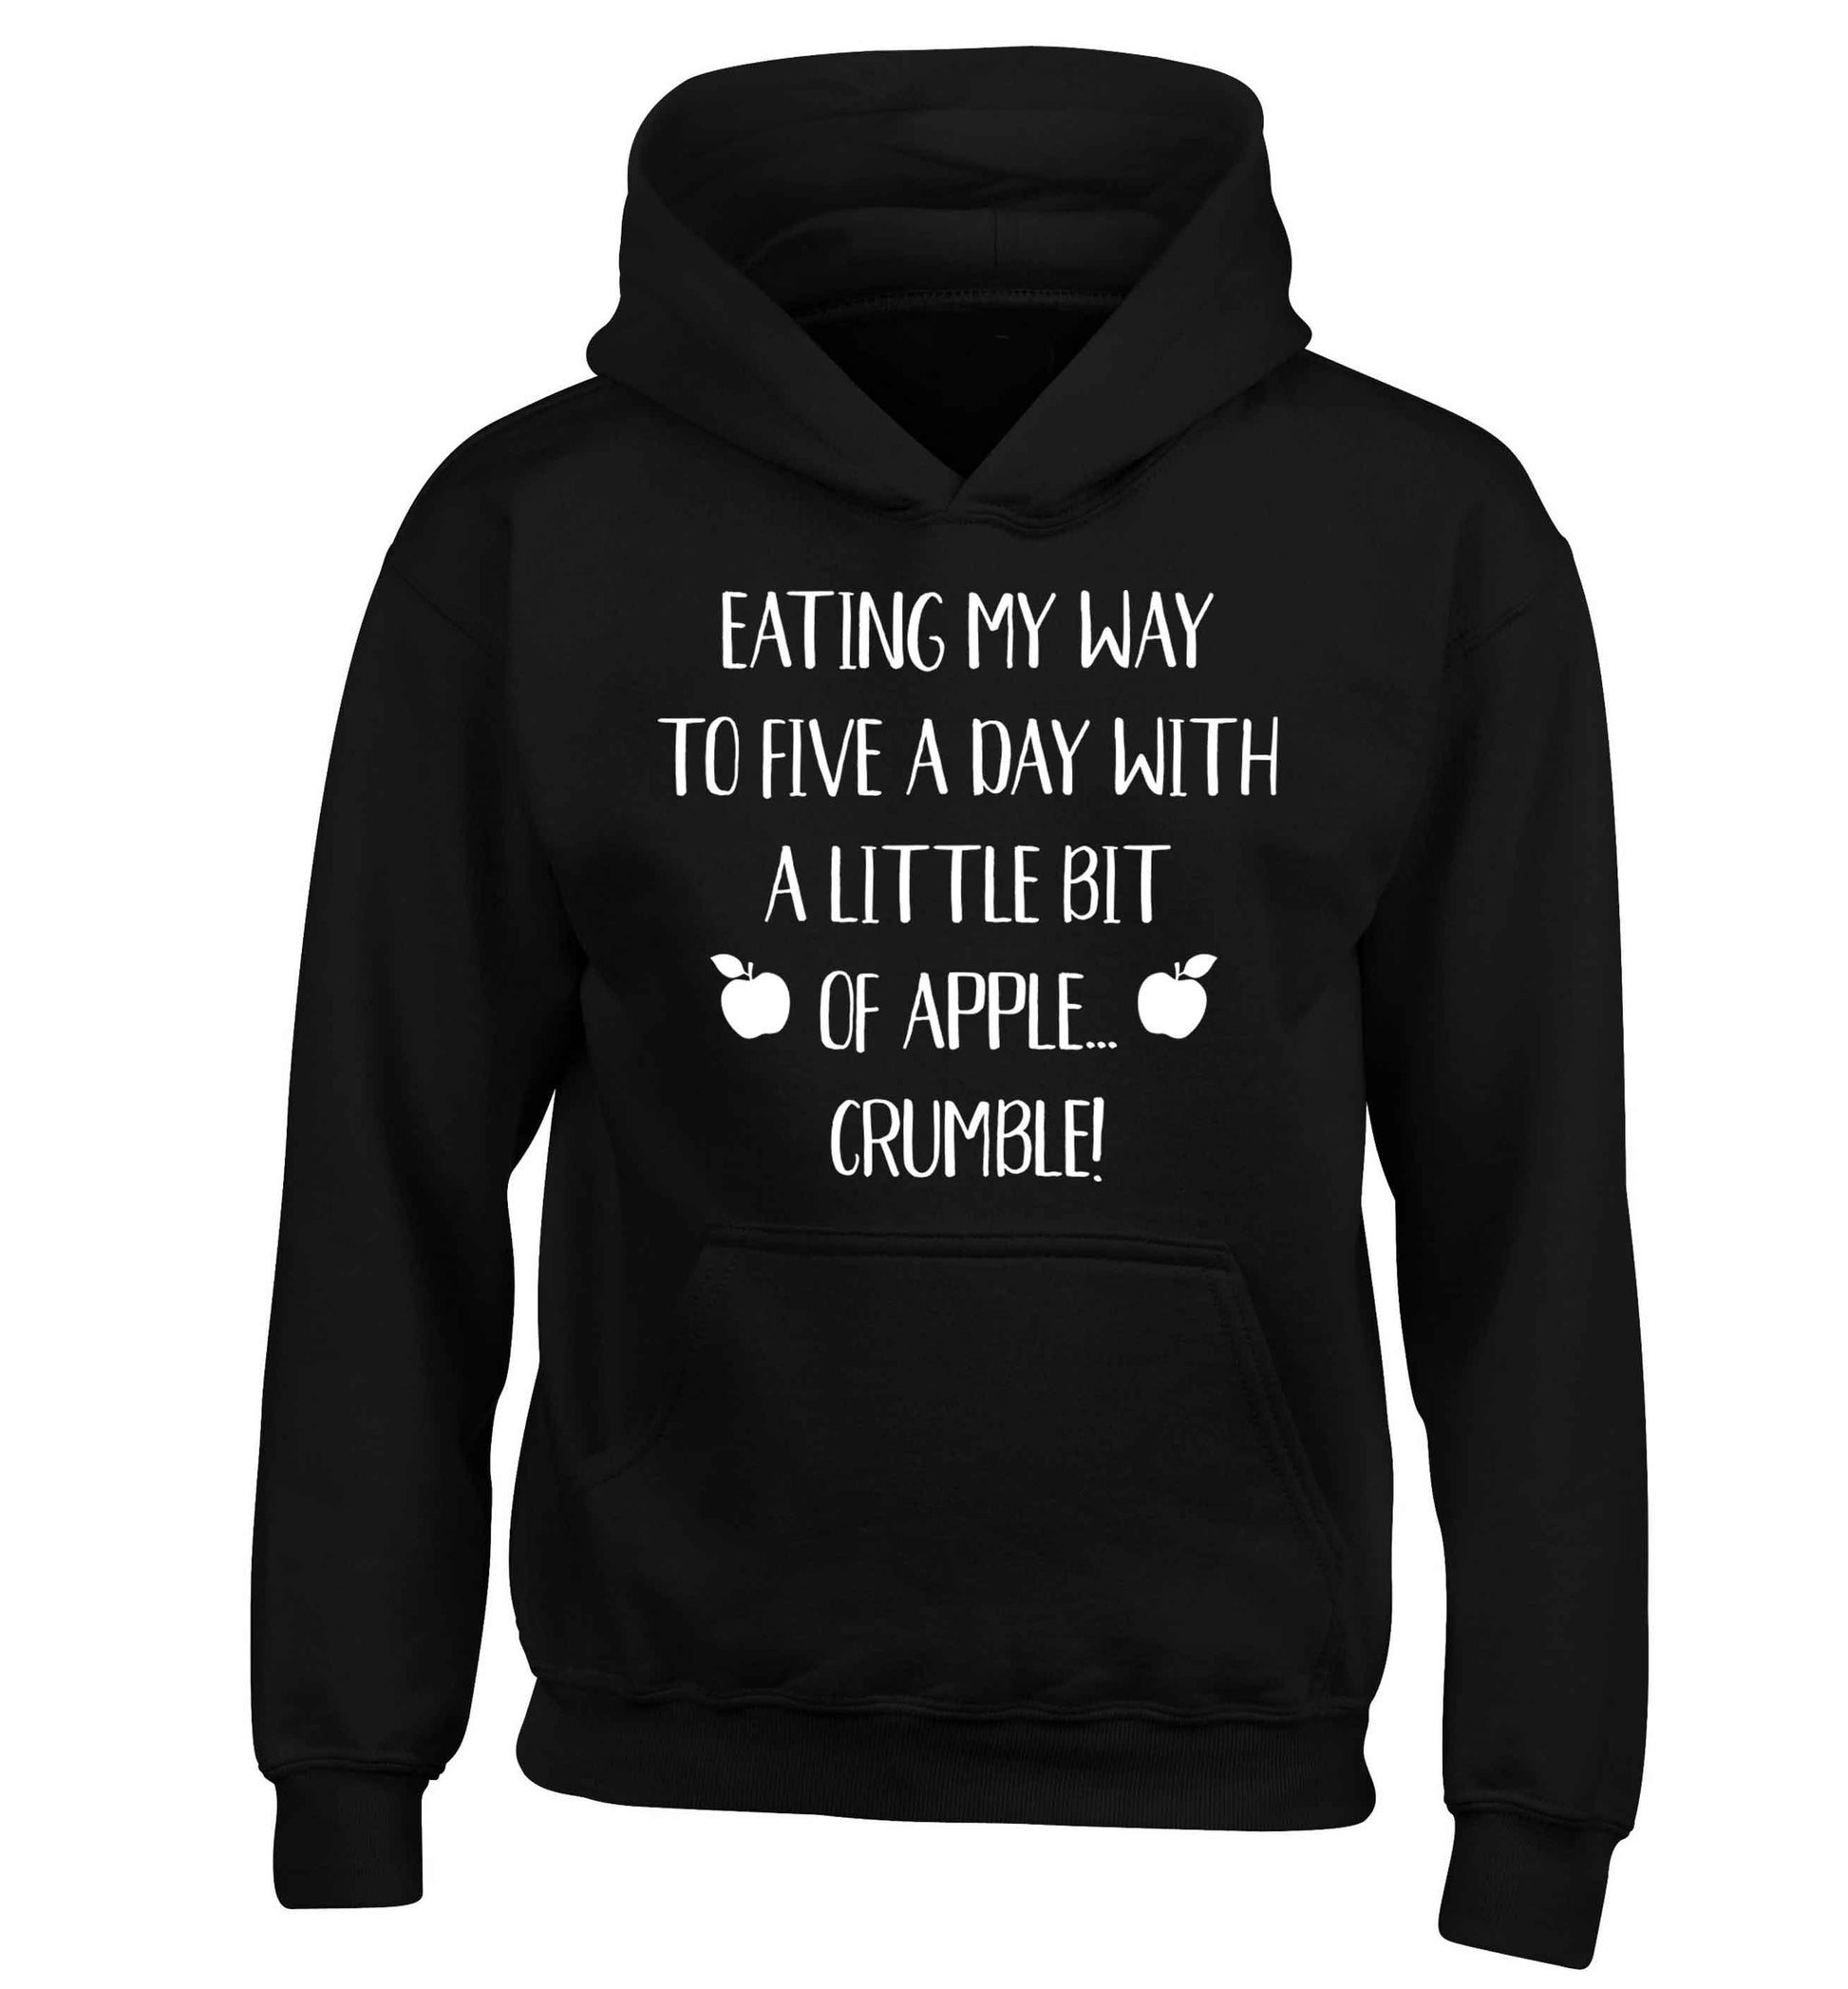 Eating my way to five a day with a little bit of apple crumble children's black hoodie 12-13 Years